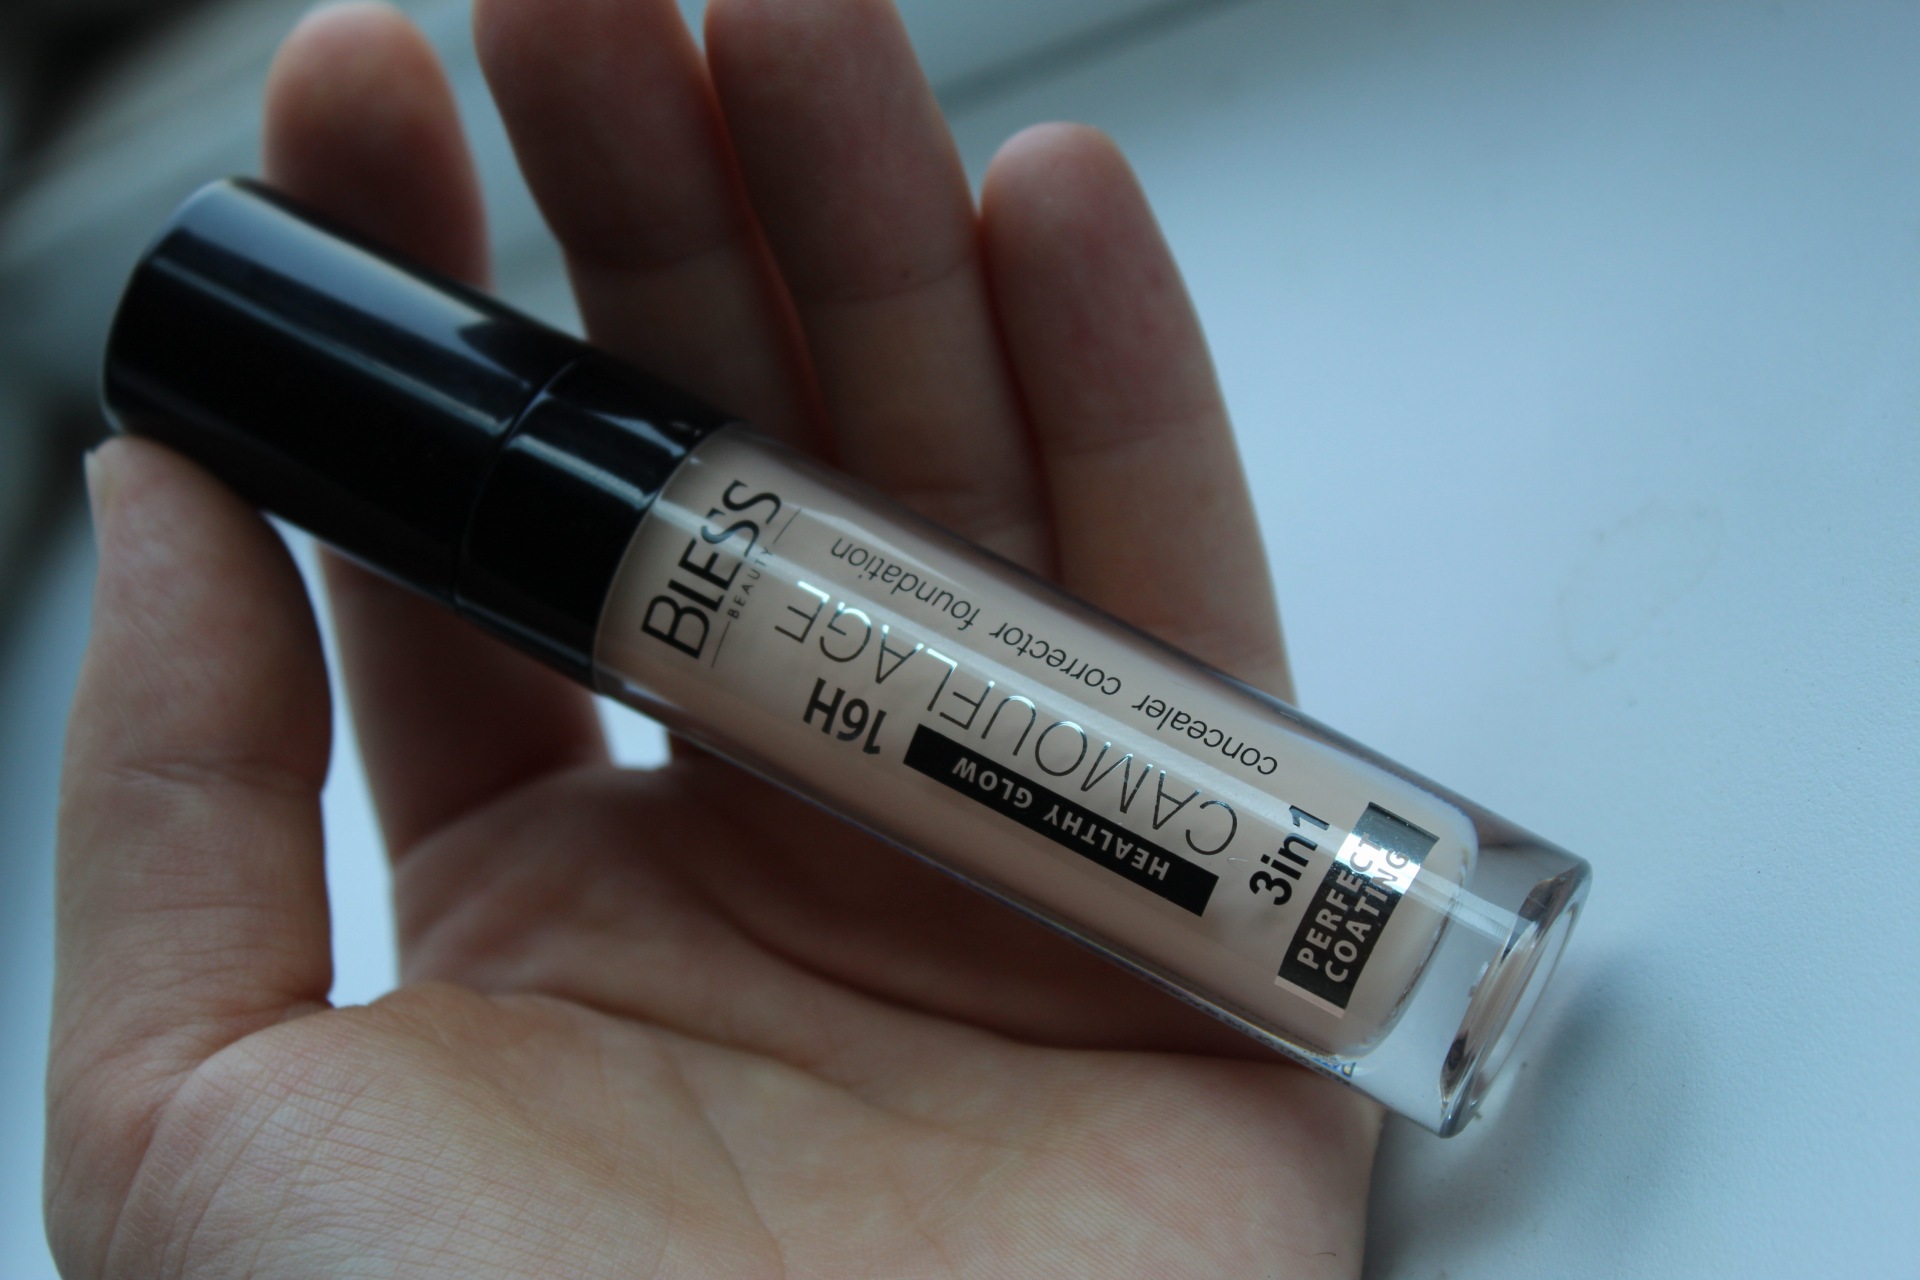 Bless Beauty Camouflage 3 in 1 Concealer